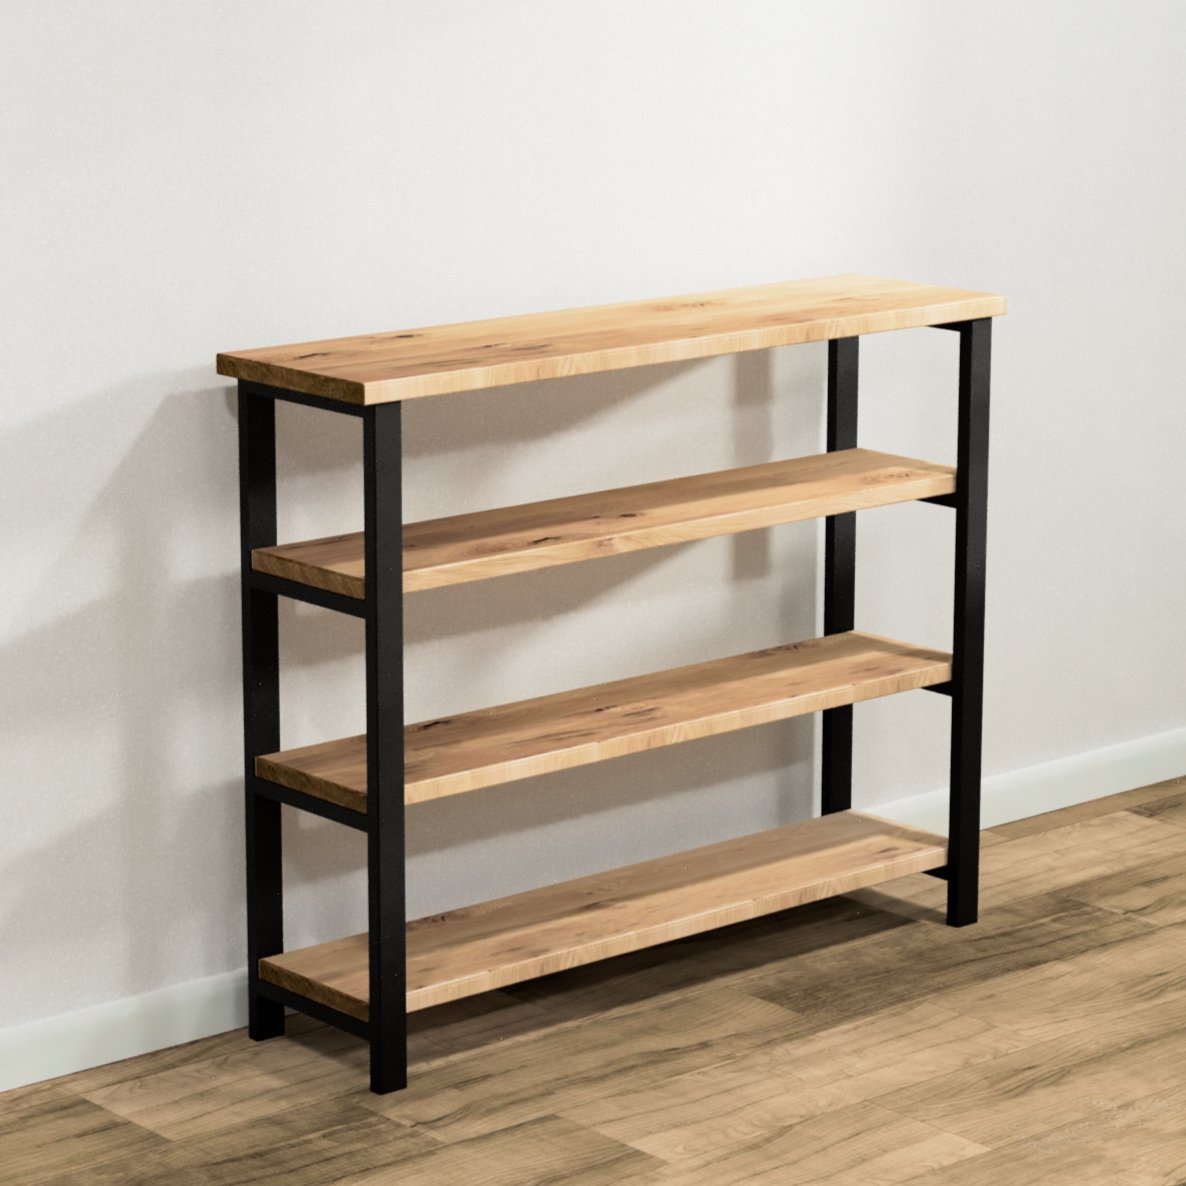 The Broadway Bookcase - FargoWoodworks